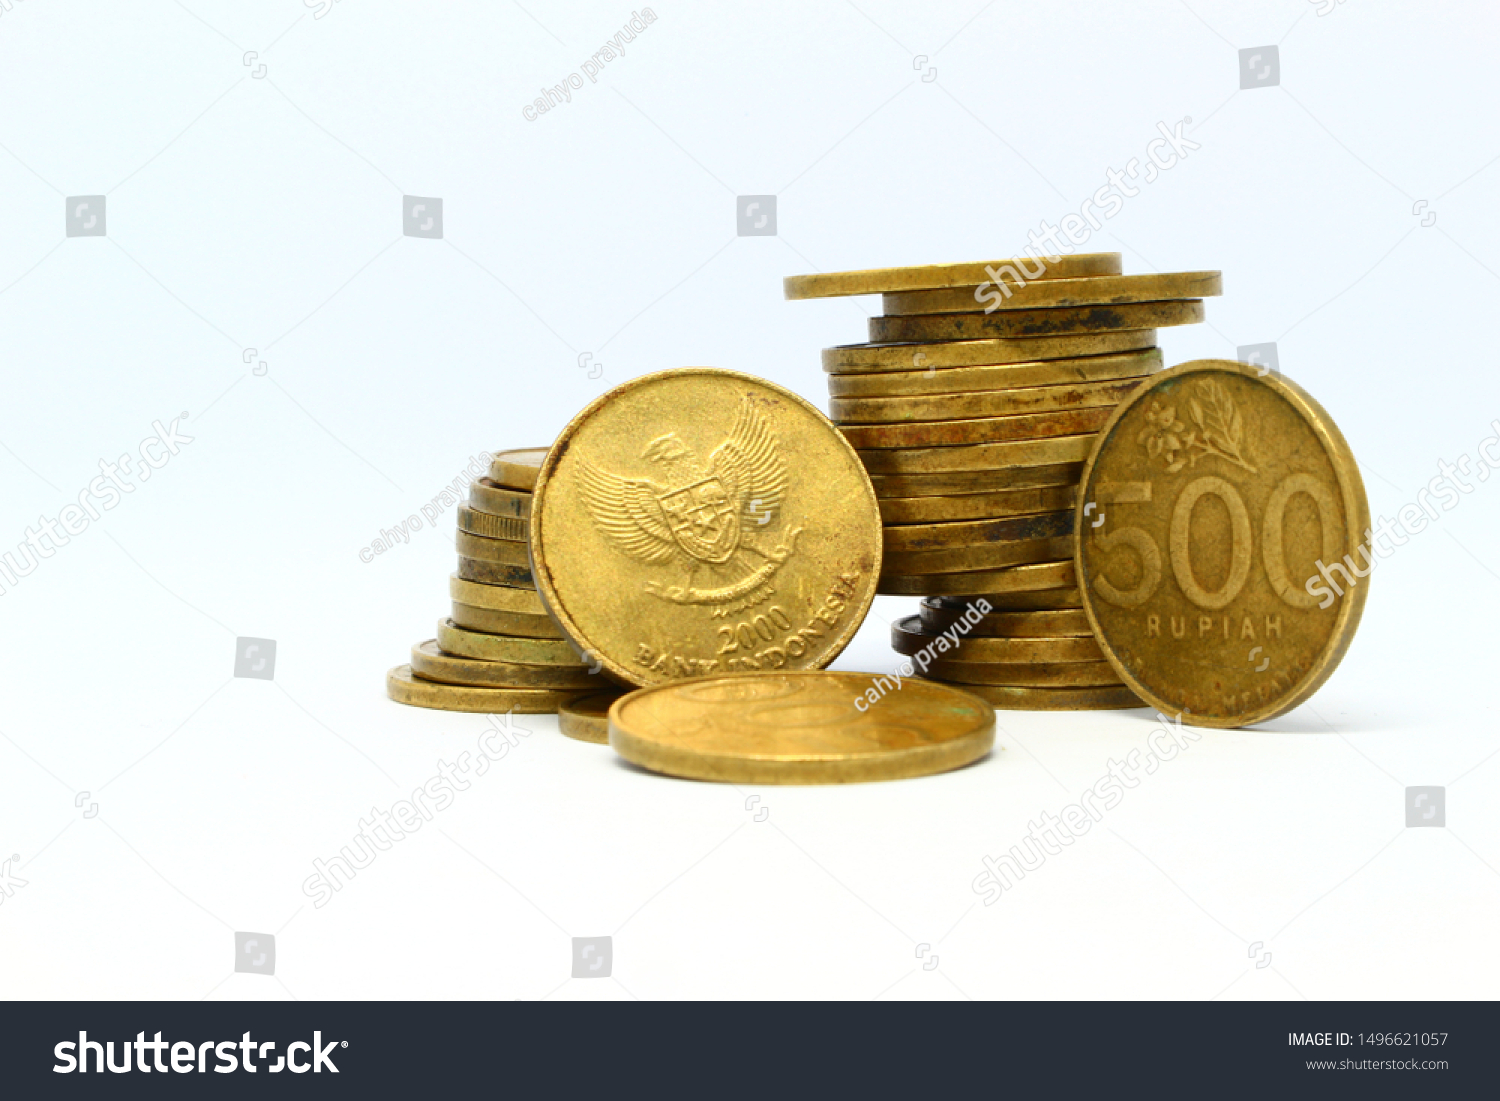 500 rupiah coins with a clean white background, Indonesia, Republic of Indonesia, Indonesia    500 indonesian rupiah coin, a coin from the republic of indonesia #1496621057